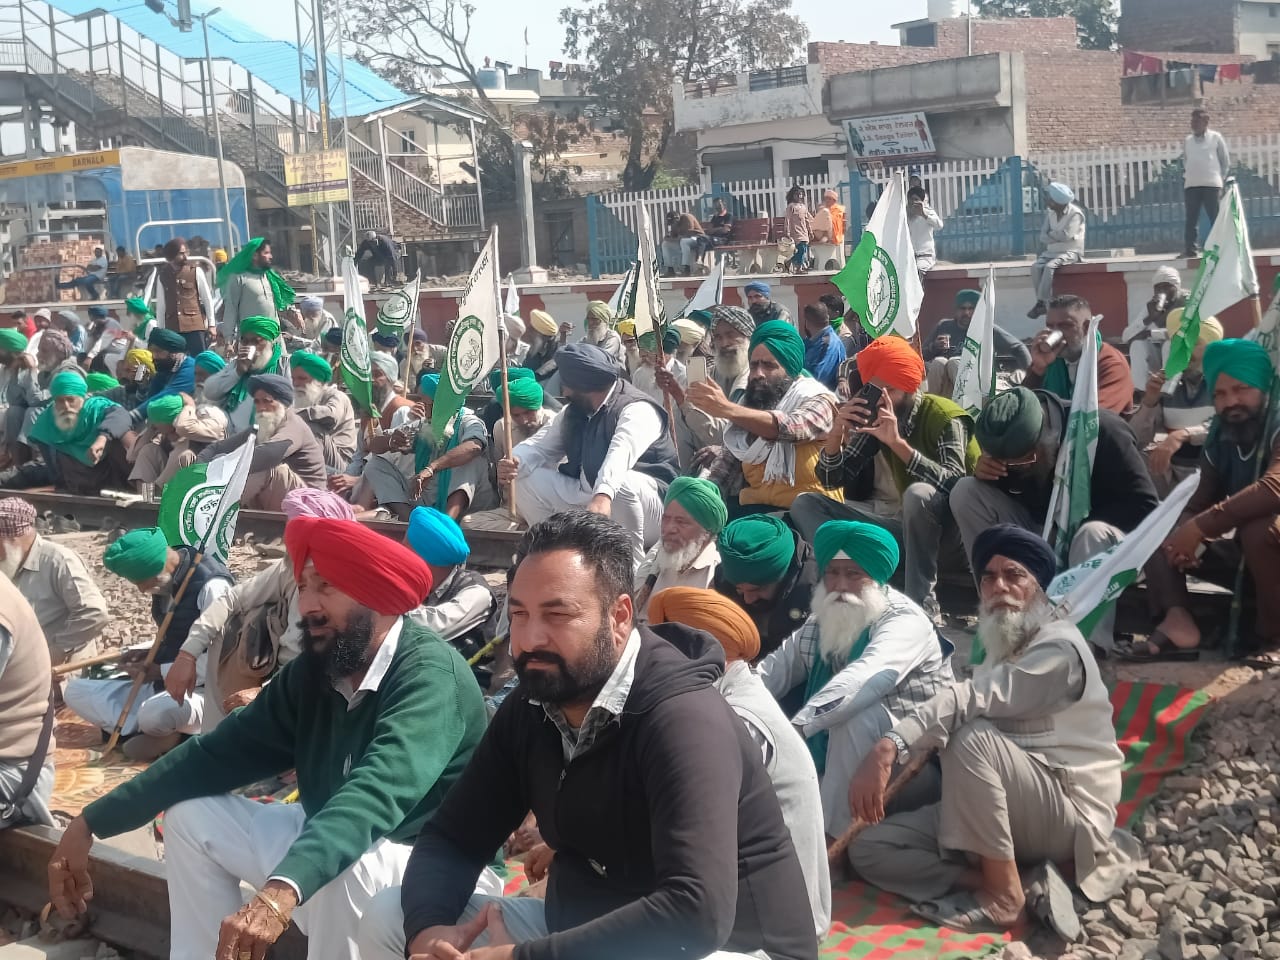 Indian Farmers' Union Dakonda protested against the central government by blocking the Bathinda-Chandigarh railway line